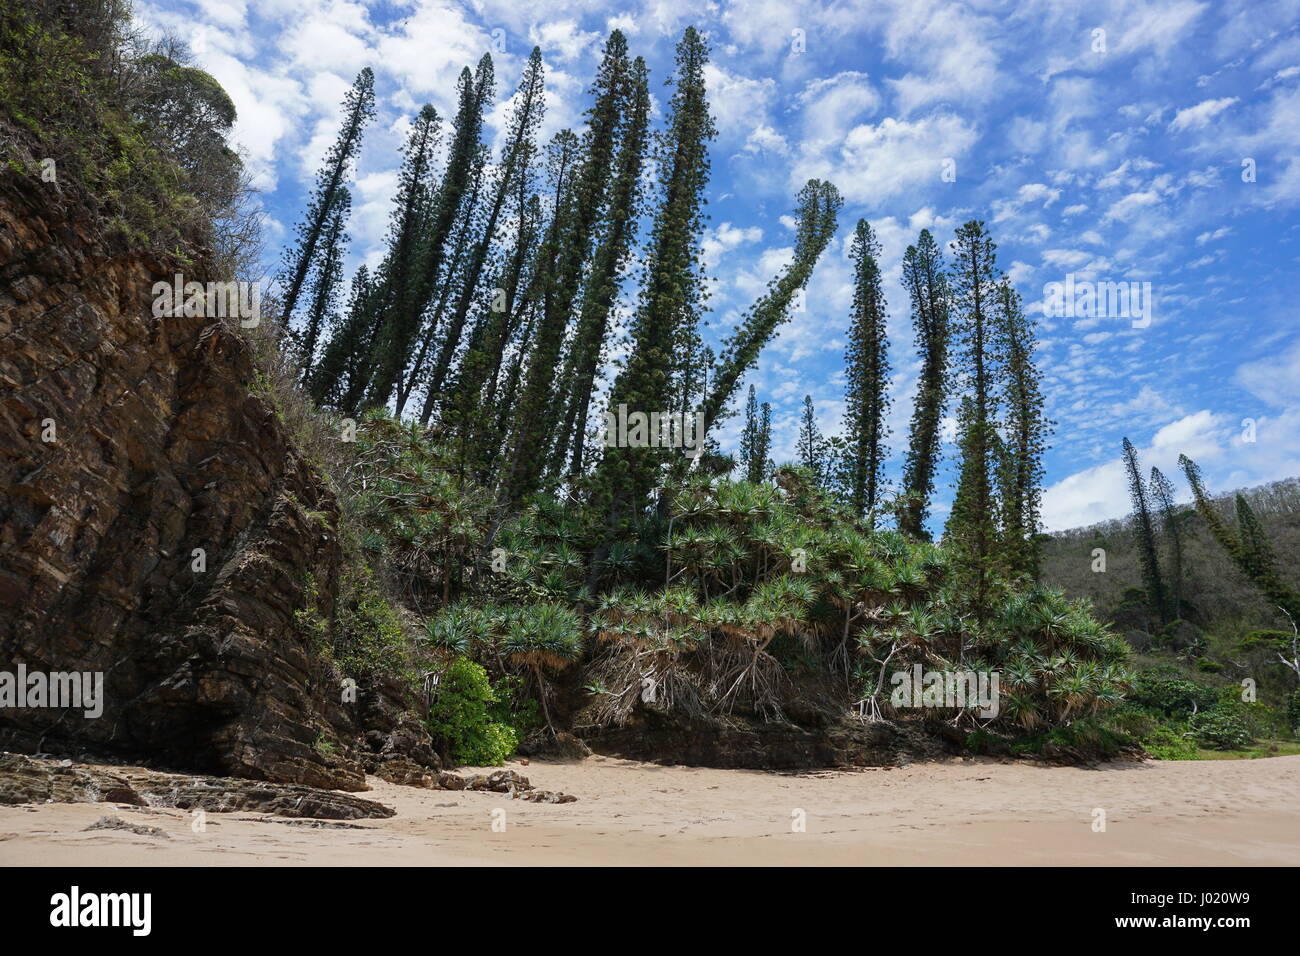 New Caledonia pines and pandanus on a beach shore in Bourail, Grande Terre island, south Pacific Stock Photo